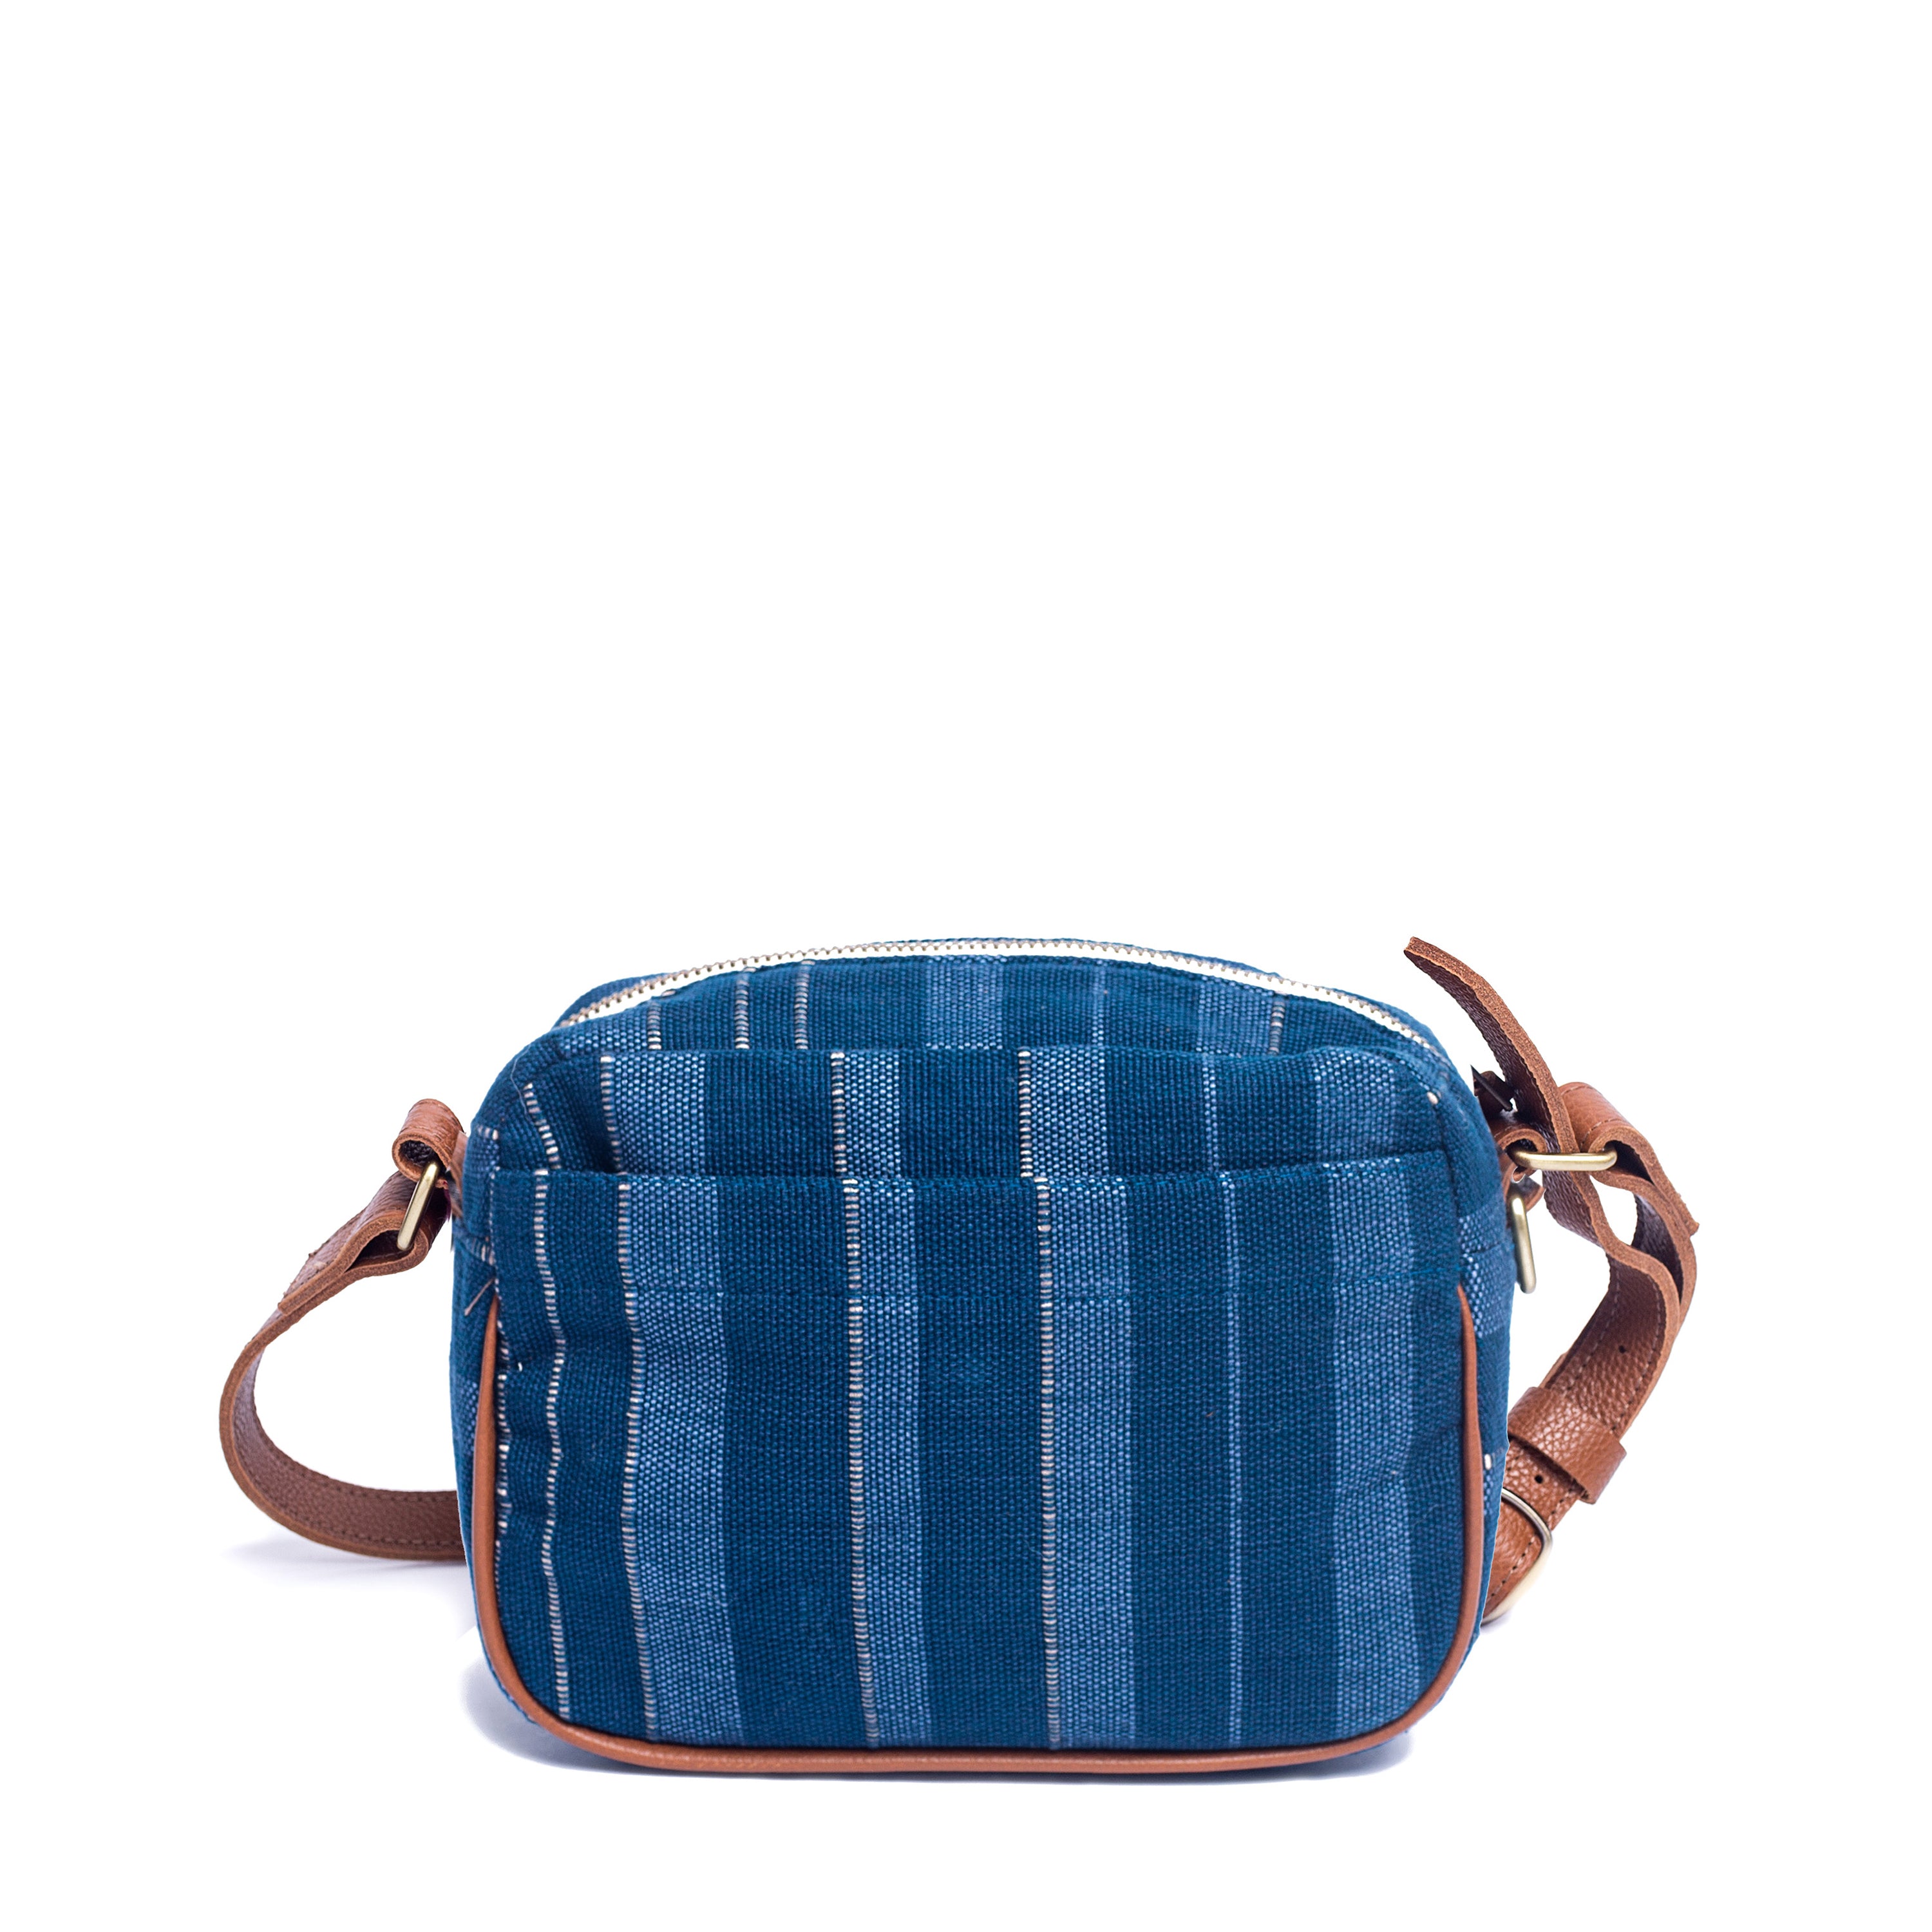 The backside of the hand woven artisan Juana Crossbody in Sky Haze pattern. It has leather vein detailing, a leather adjustable strap, a top that closes with a zipper, and a back pocket.